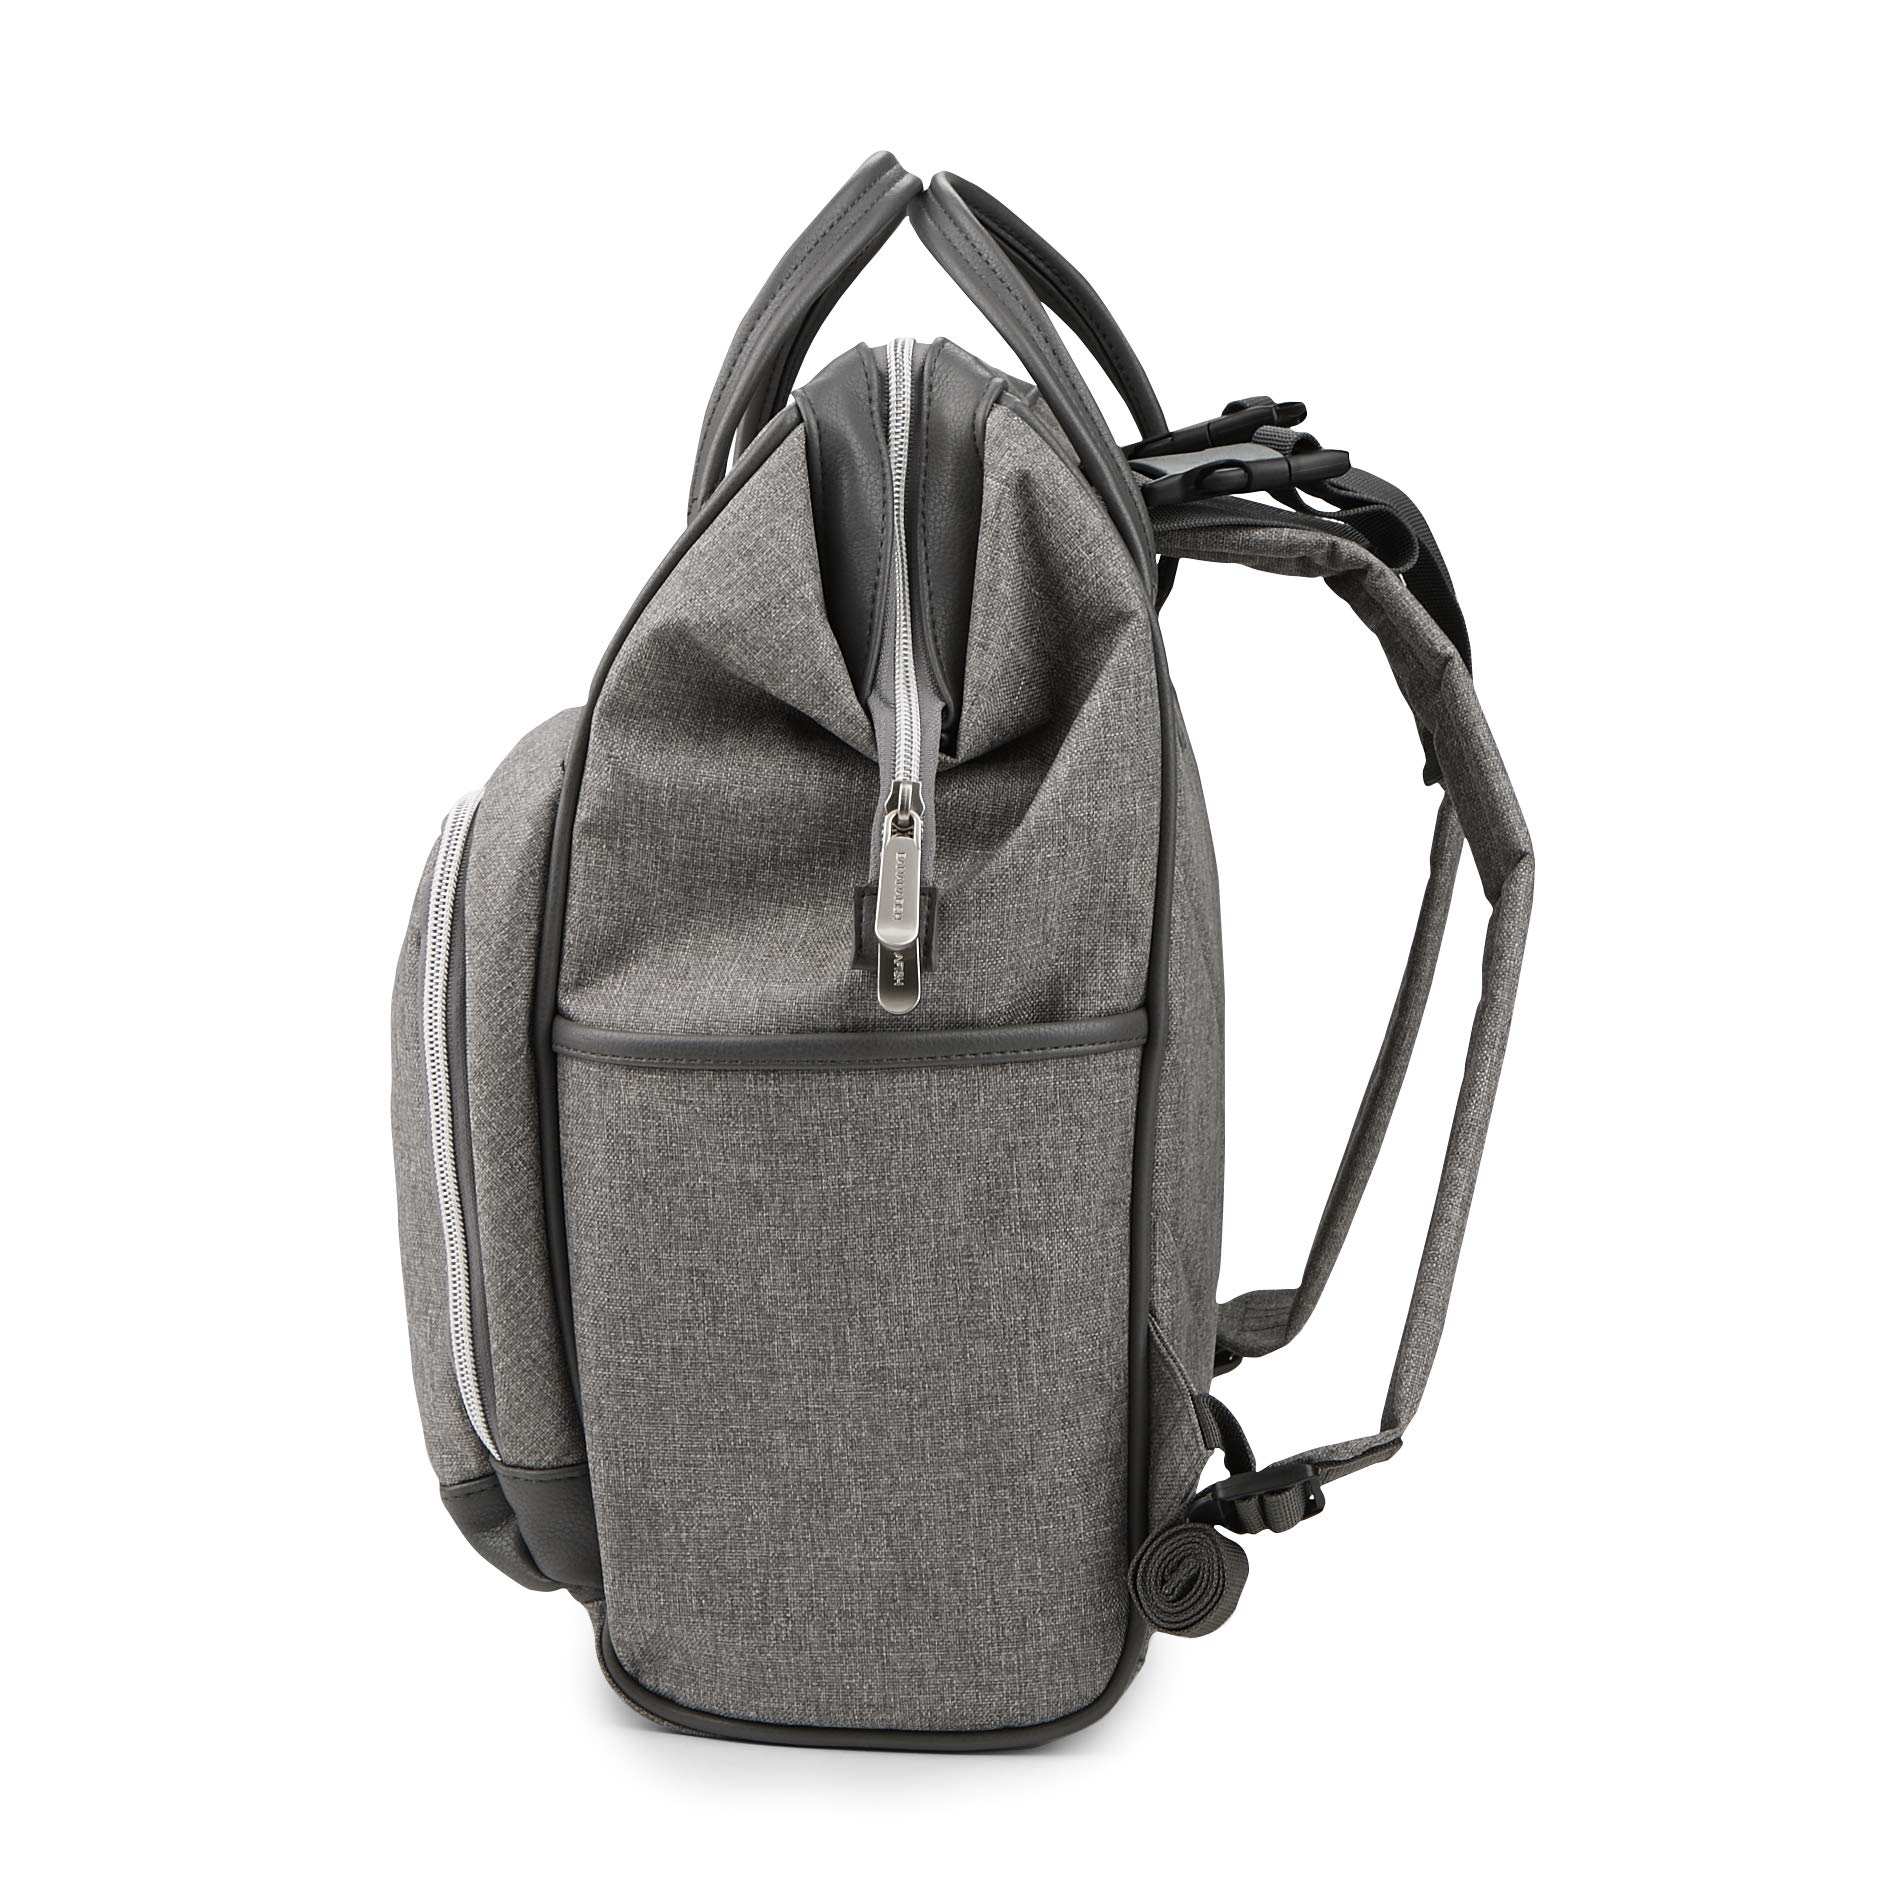 Multi-Function Design Nappy Bag for Baby Care or Travel - Carry or Wear as Backpack - Large Capacity in Trendy, Stylish Design, Light Grey